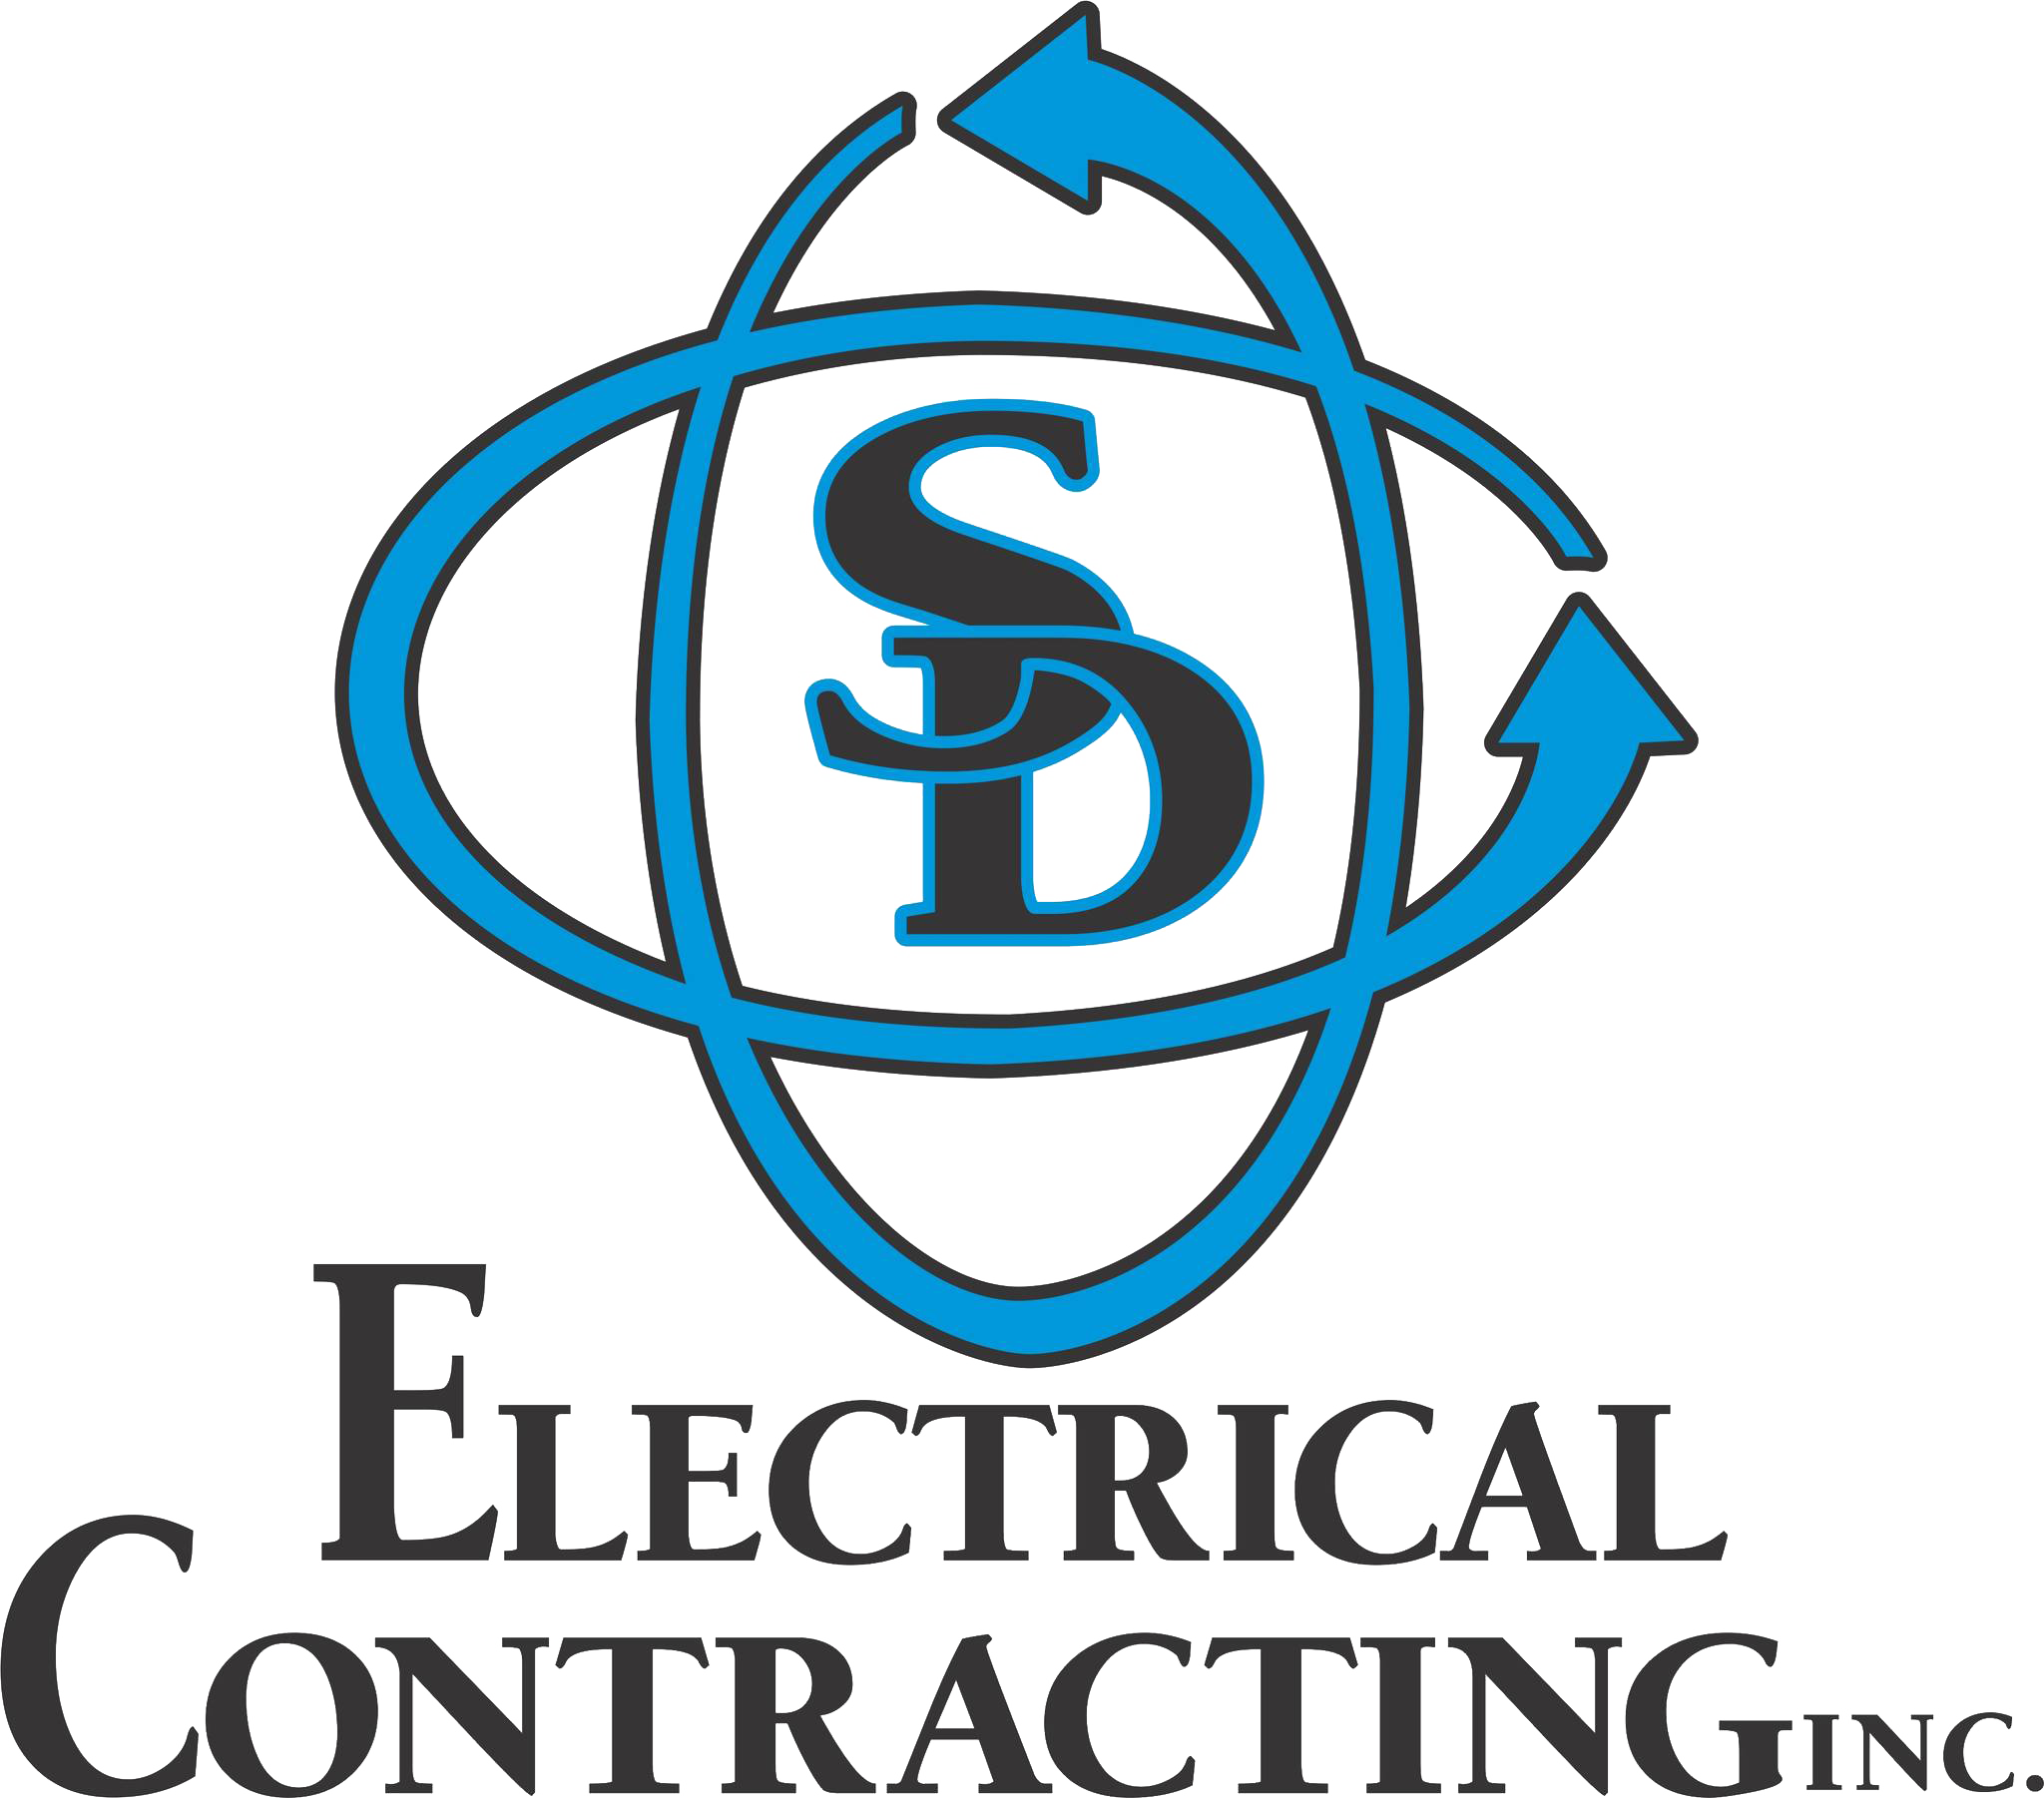 S. D. Electrical Contracting Inc.